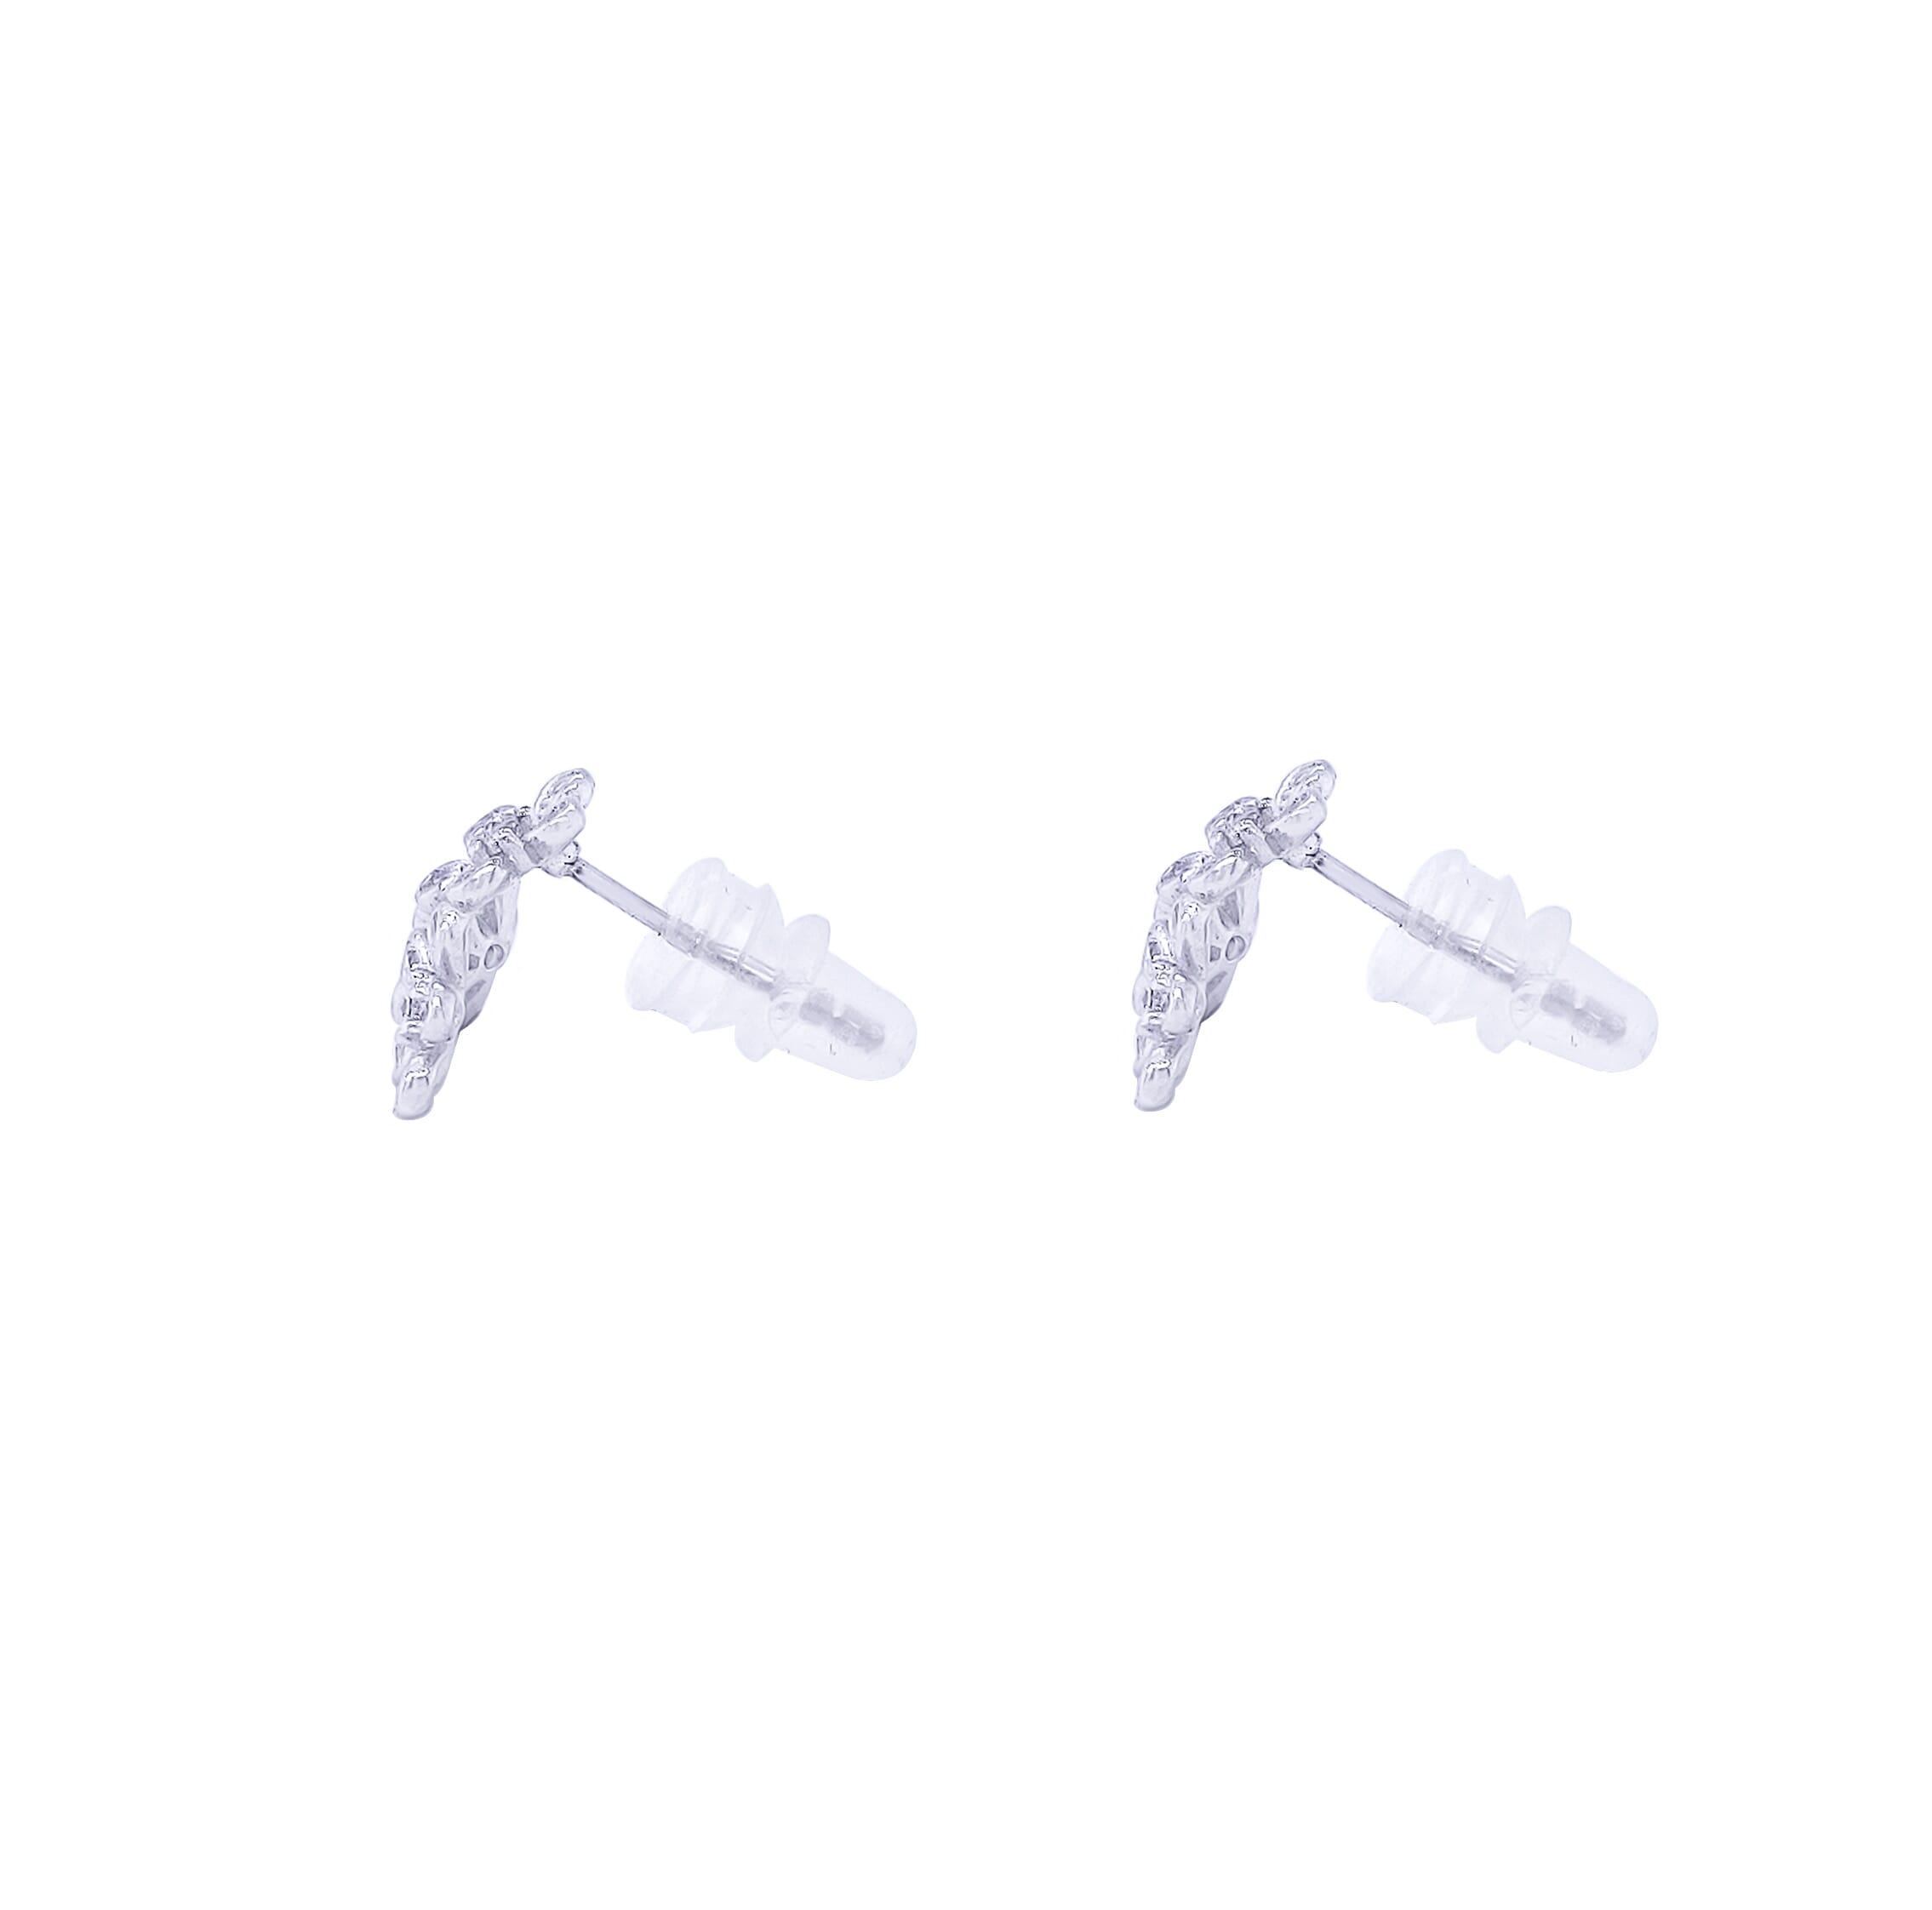 Asfour Stud Earring Made Of 925 Sterling Silver With A Design Of Three Flowers Designed In The Shape Of A Triangle